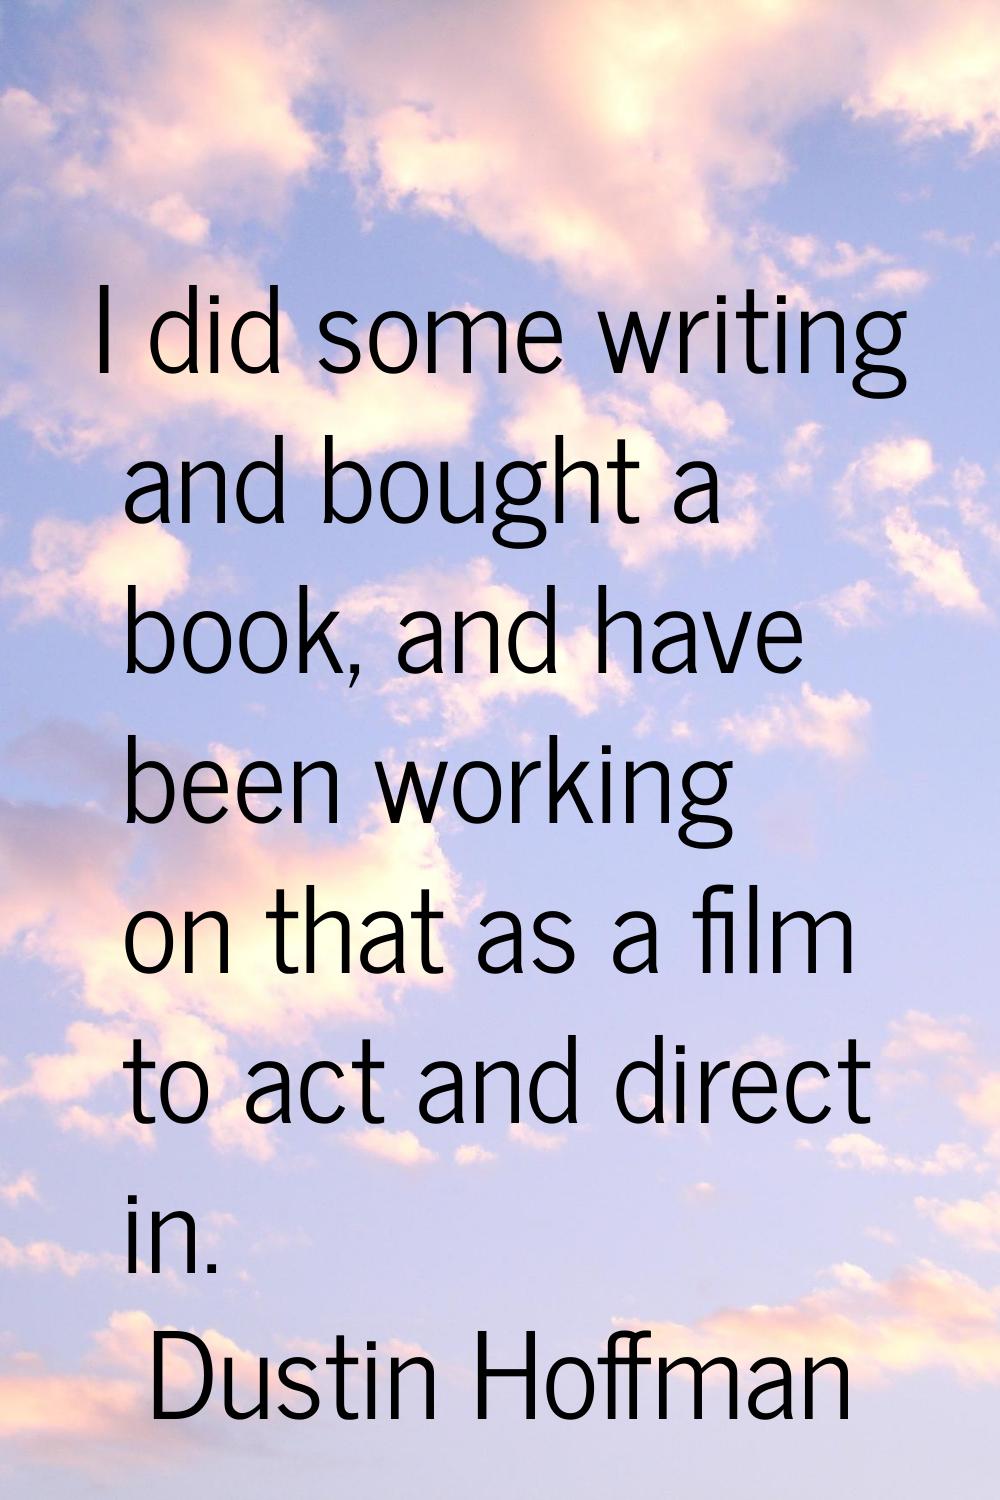 I did some writing and bought a book, and have been working on that as a film to act and direct in.